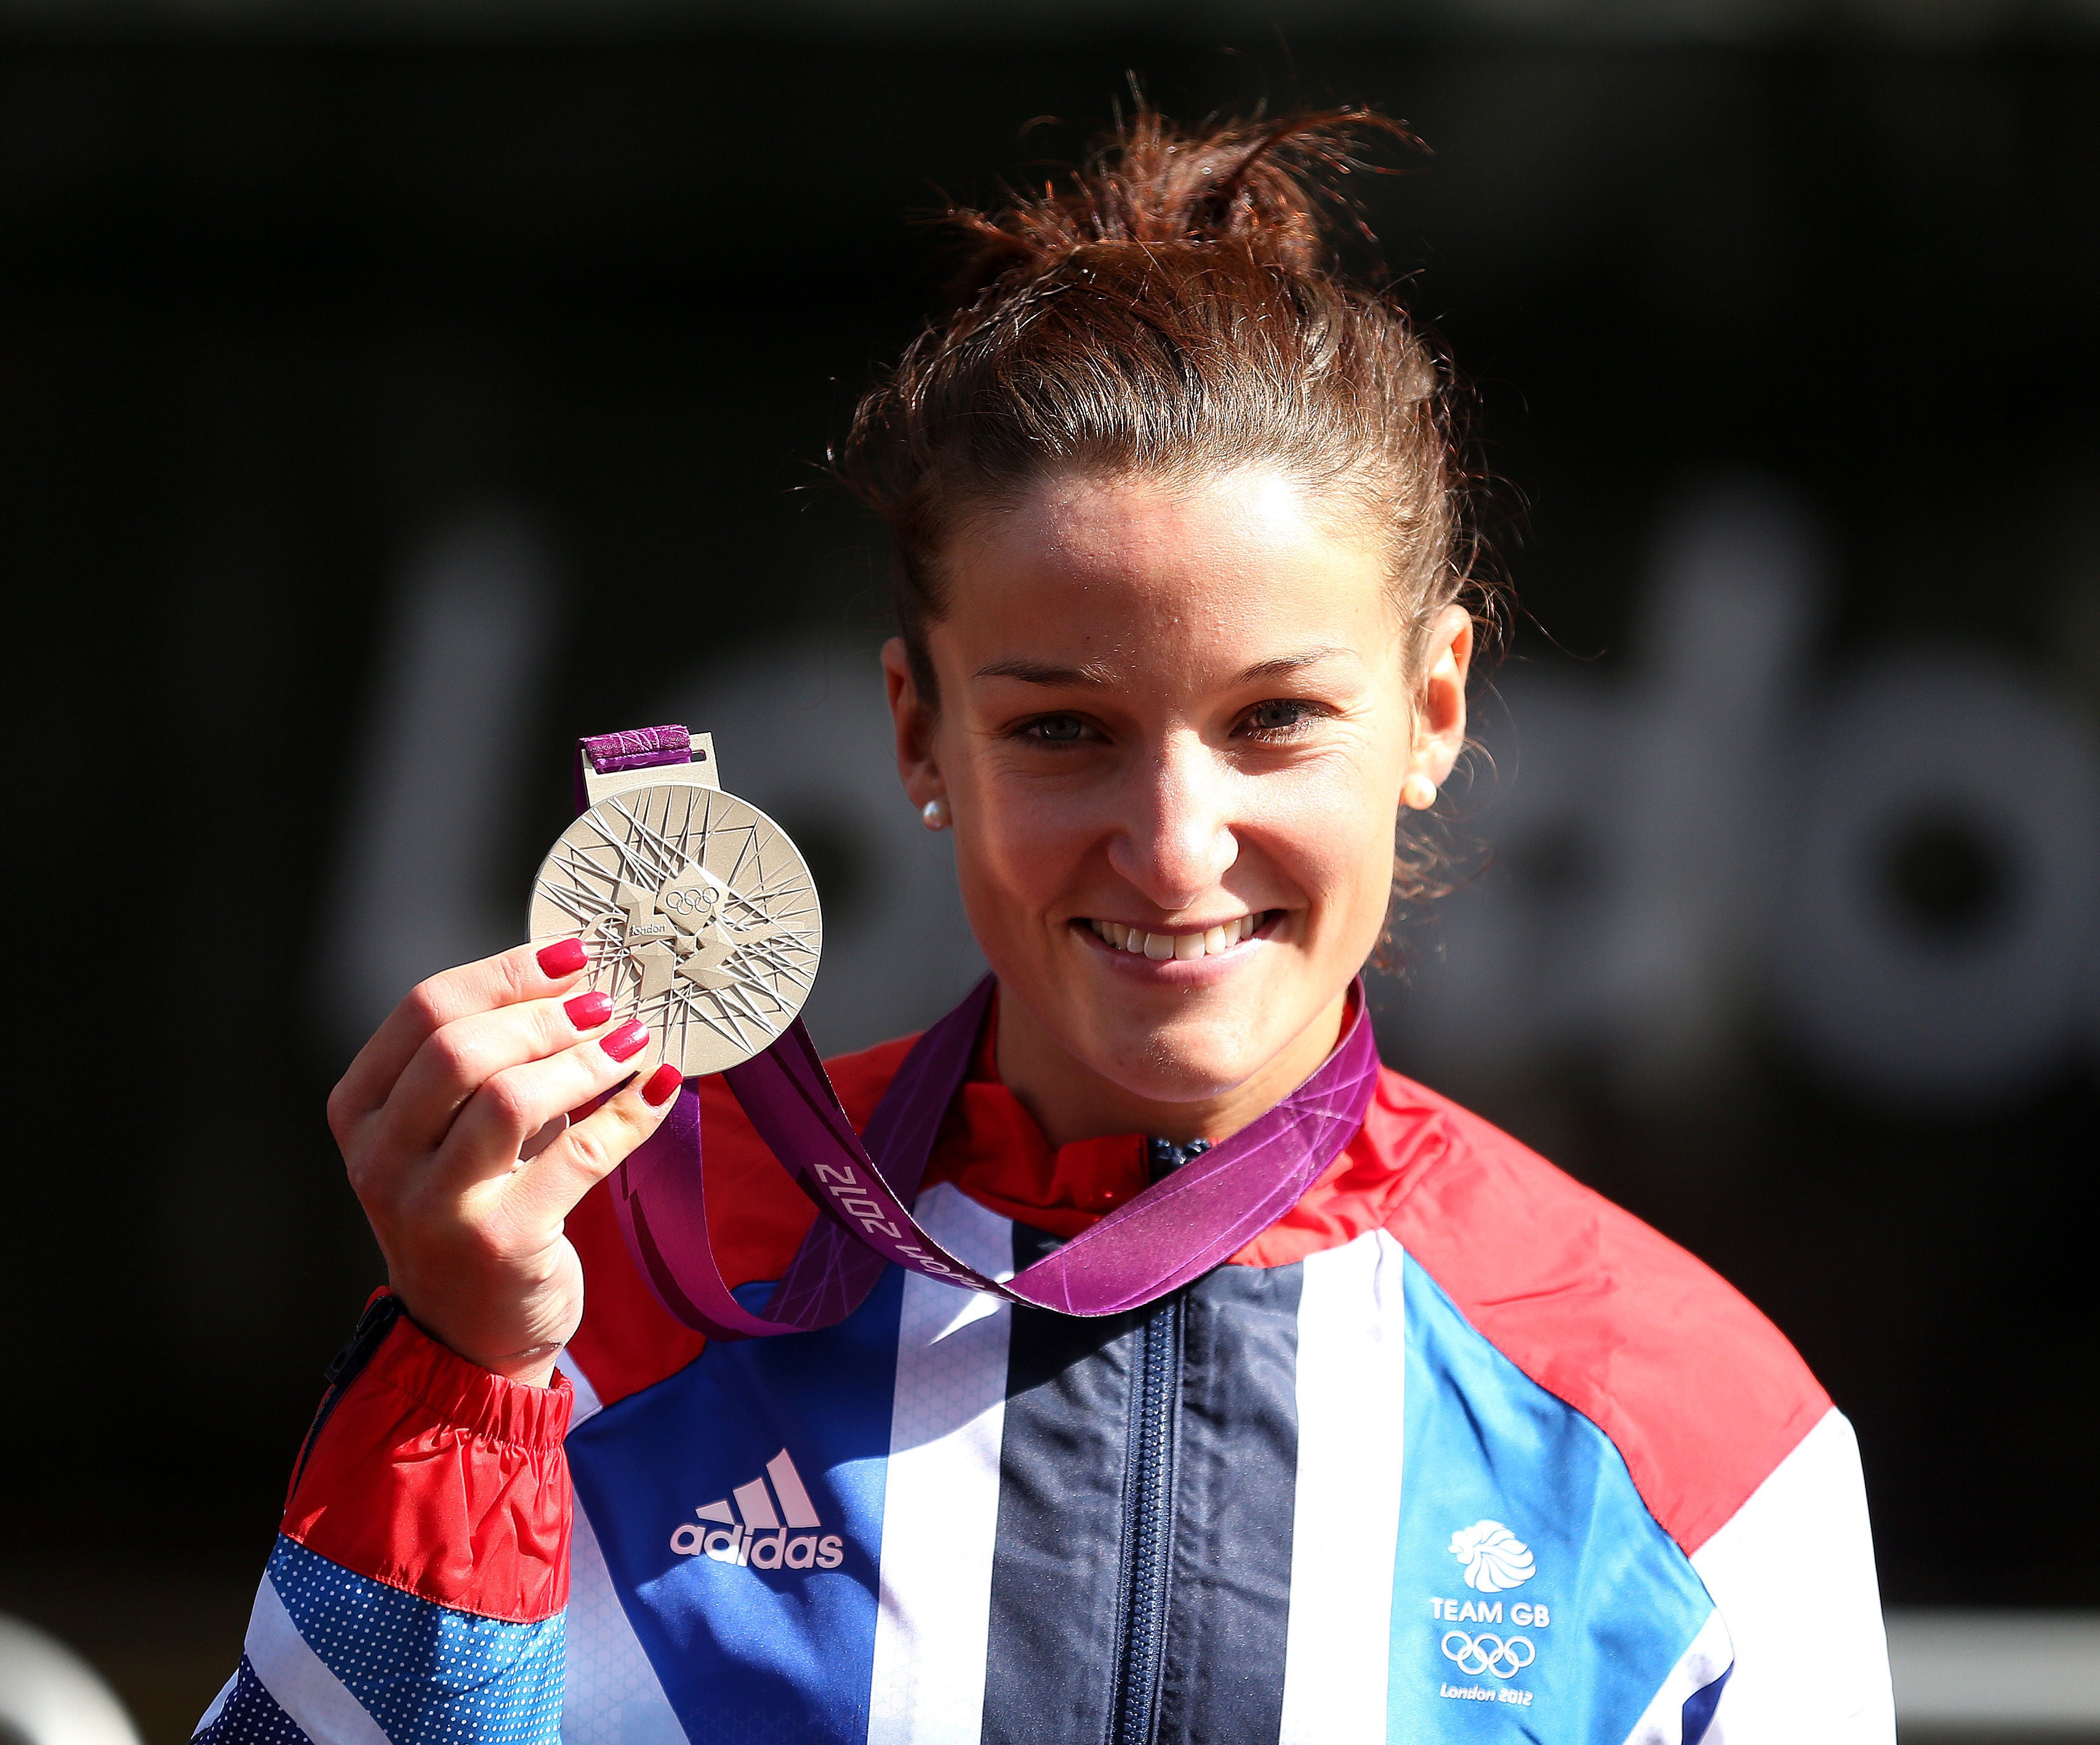 Team GB won their first London 2012 medal, with cyclist Lizzie Deignan (nee Armitstead) taking silver in the women’s road race (Mike Egerton/PA)